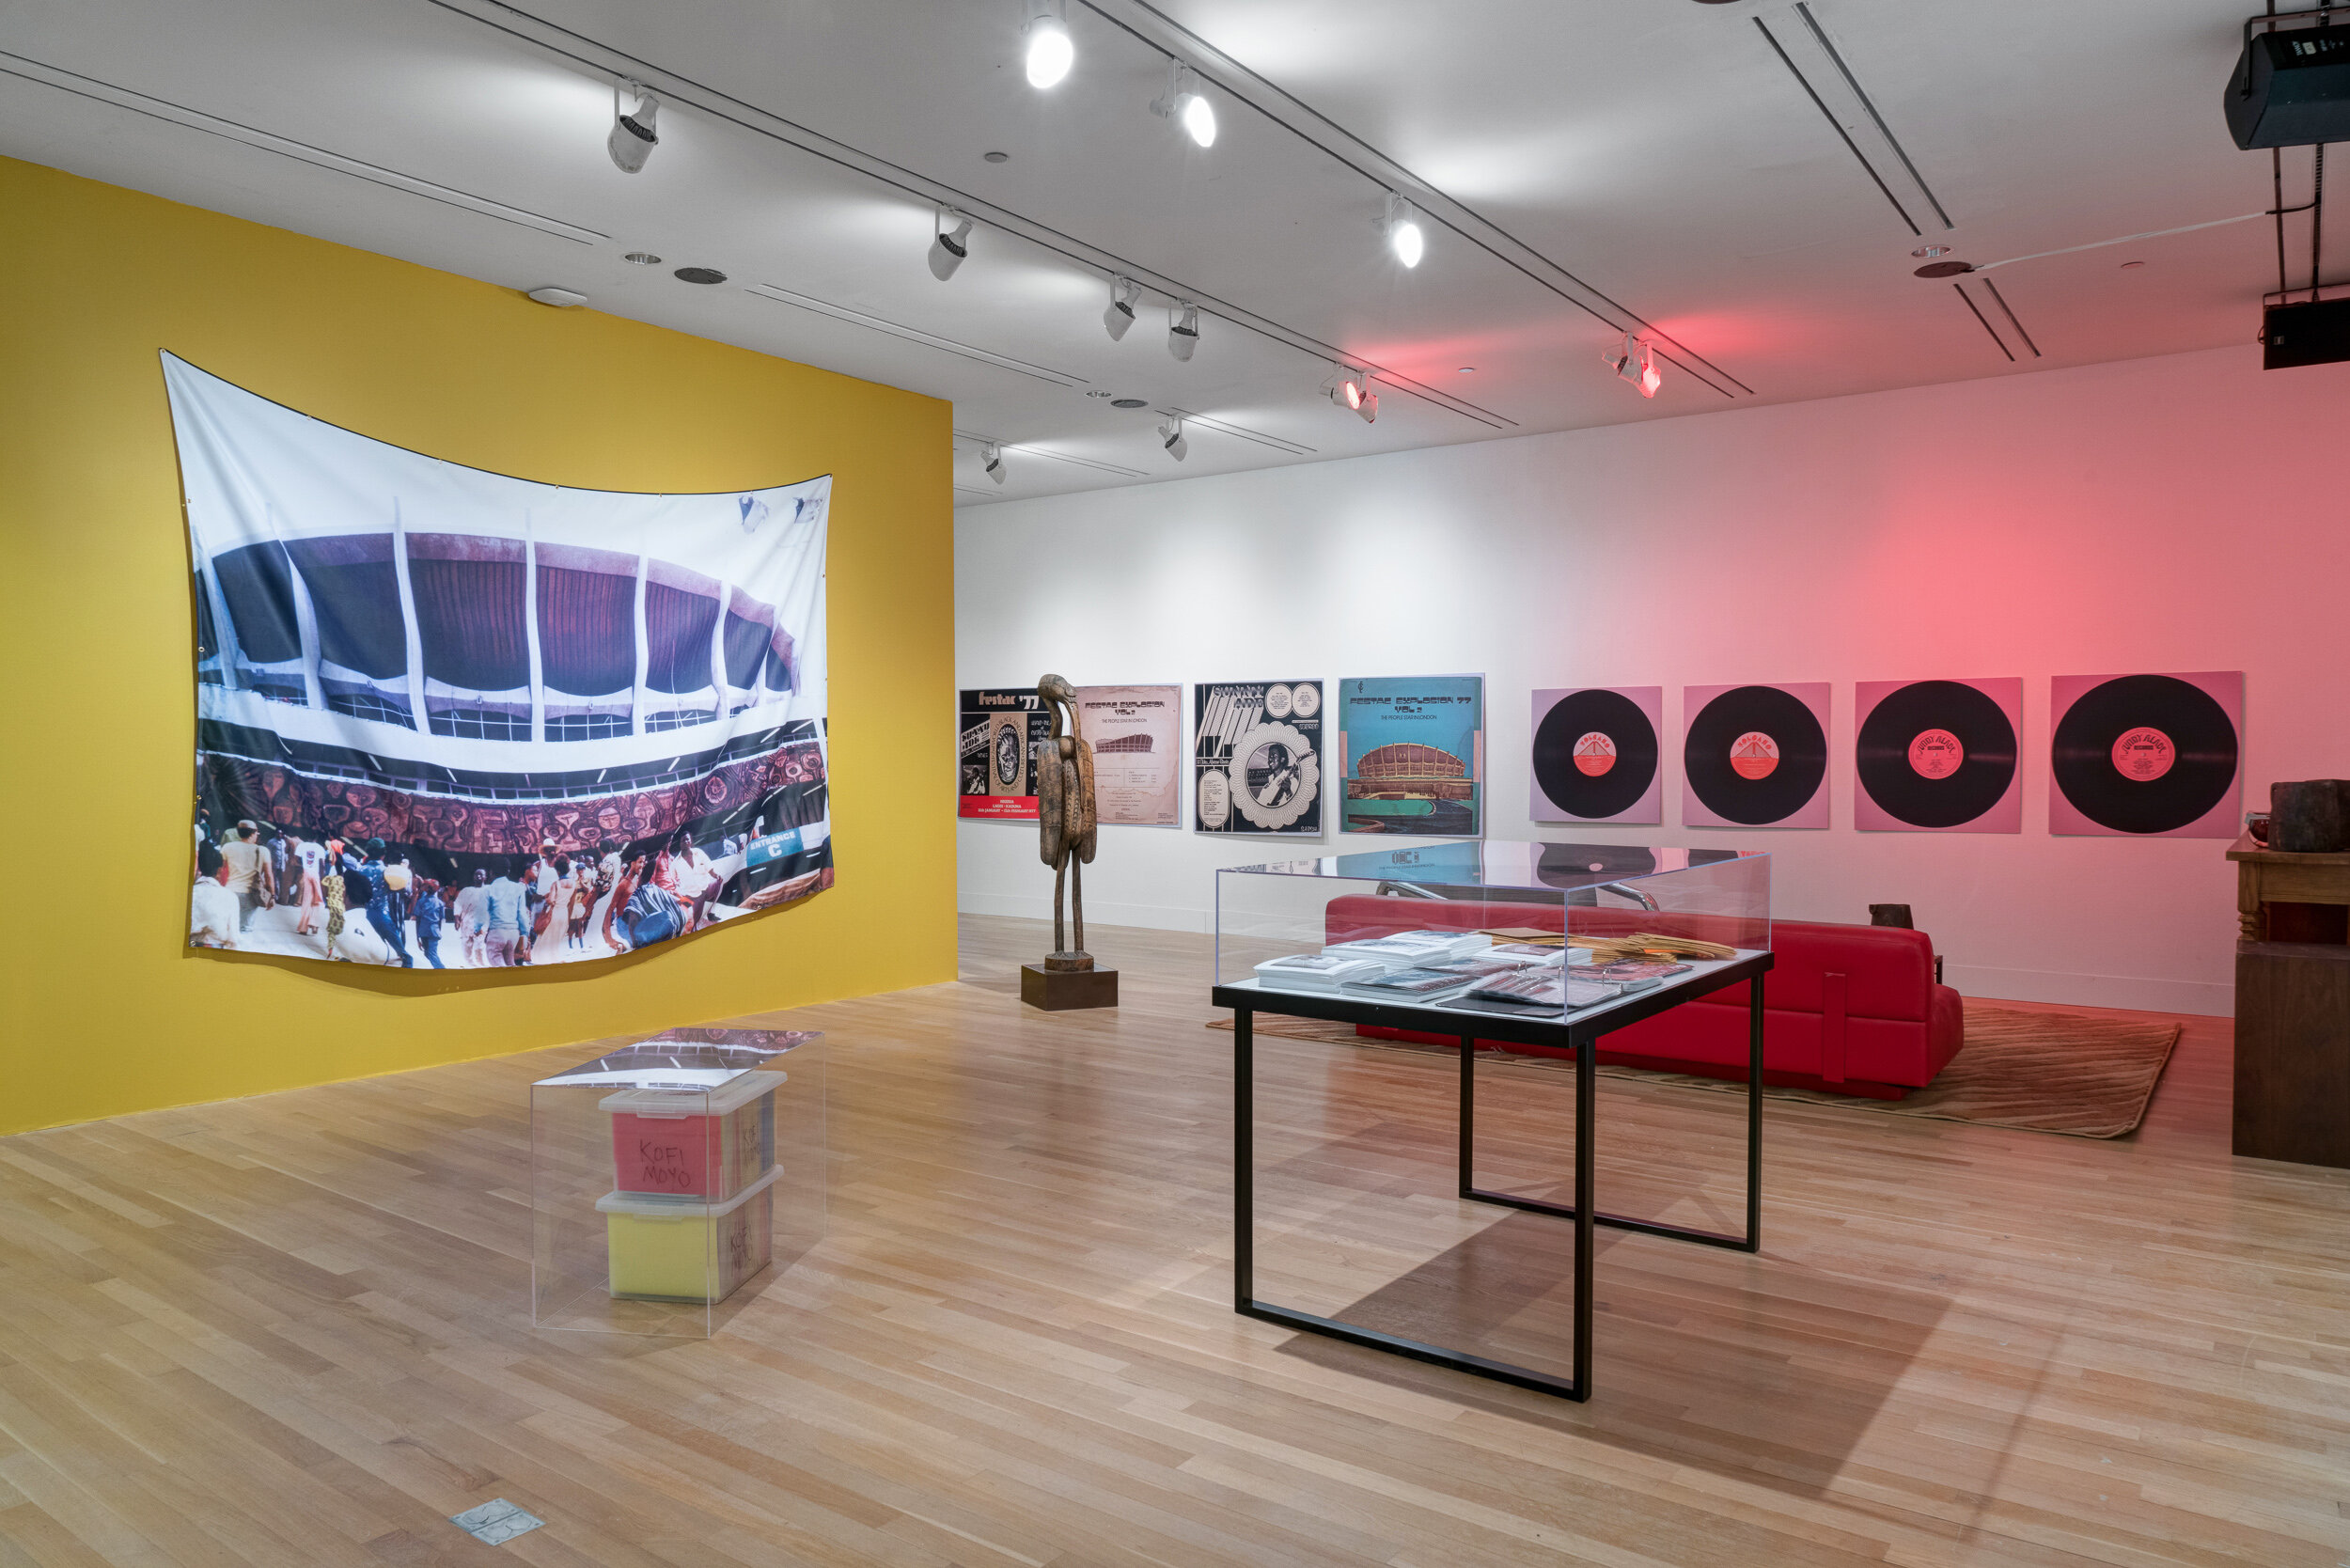   K. Kofi Moyo and FESTAC ’77: The Activation of a Black Archive,  February 12 - March 21, 2021.   Installation view in the Logan Center Gallery. Photo by Robert Chase Heishman 